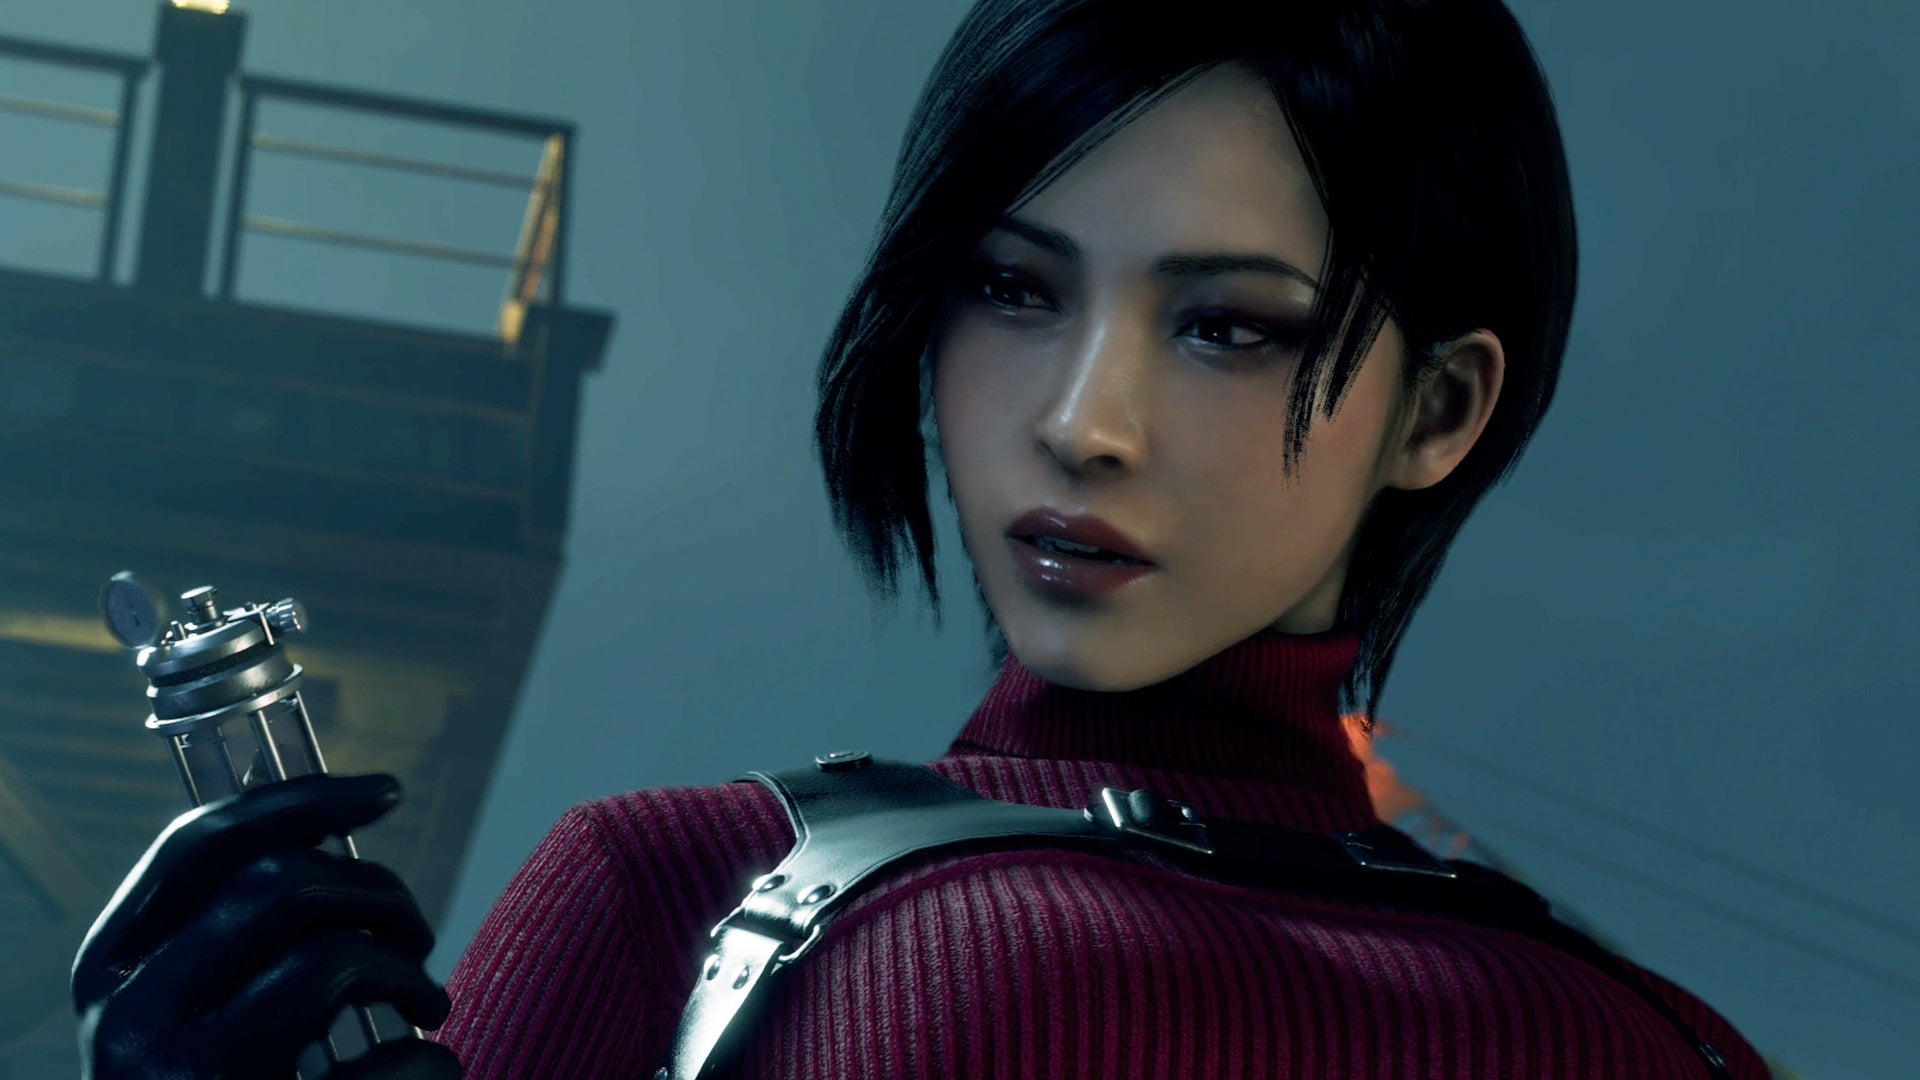 Hateful Comments Prompt Resident Evil 4 Remake's Ada Wong to Nuke Instagram  Account